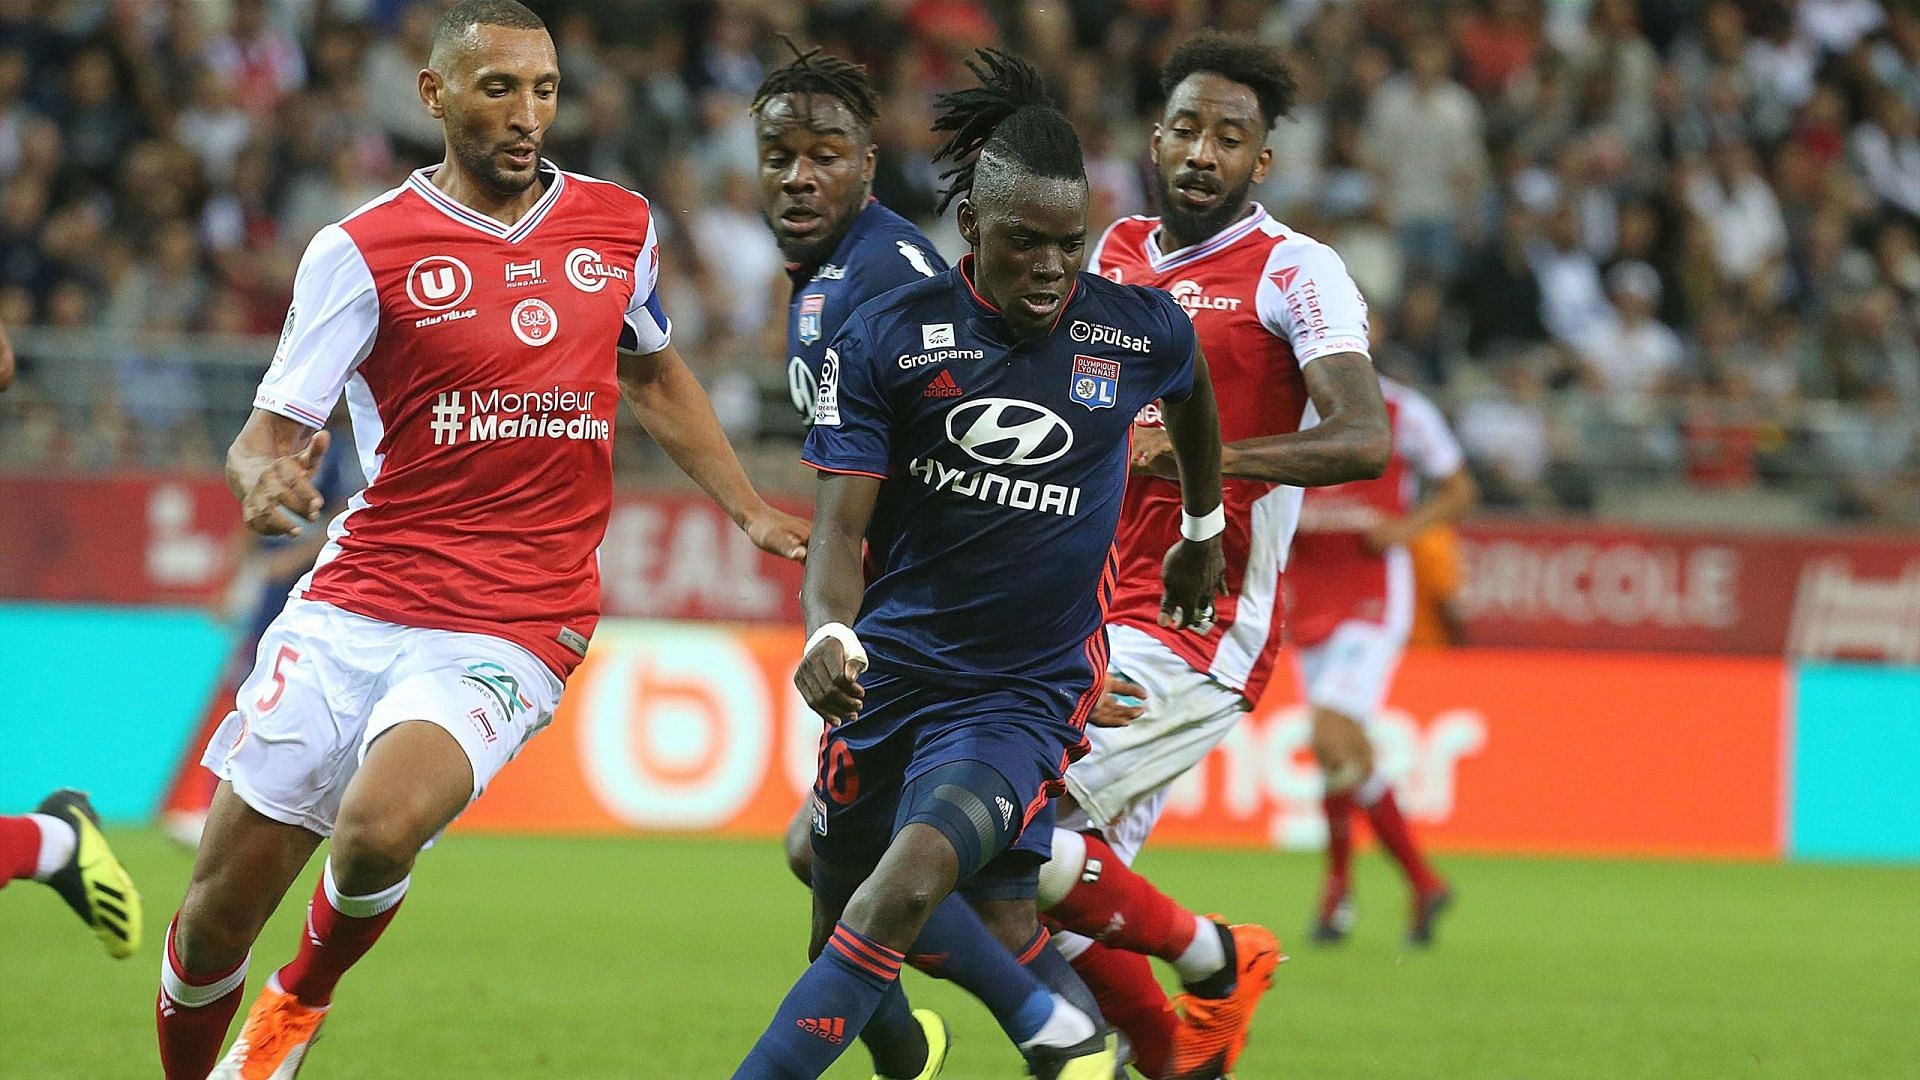 Lyon take on Reims in Ligue 1 on Saturday